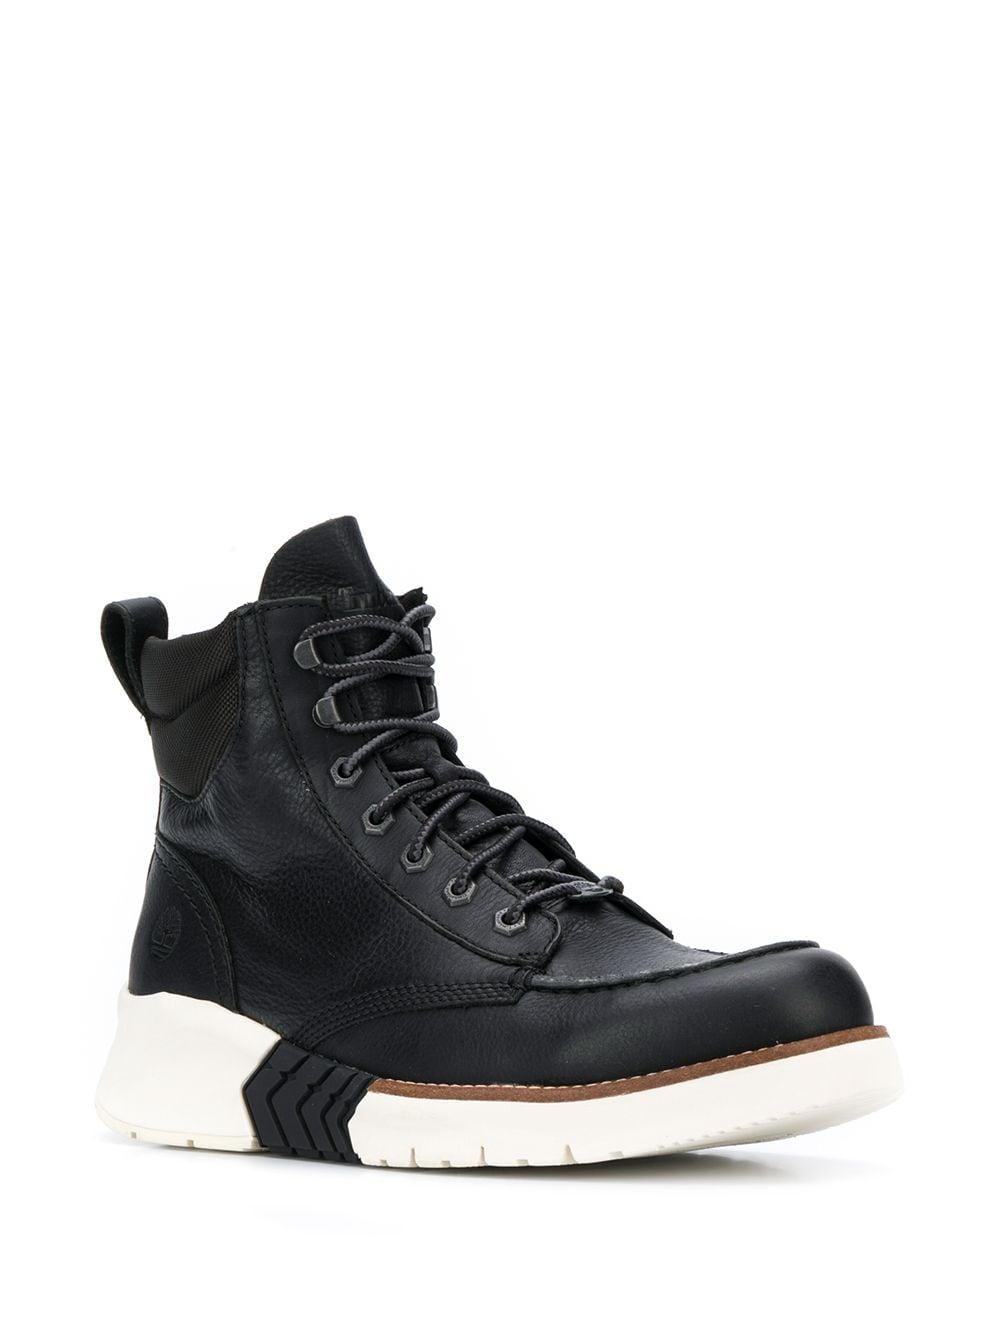 Timberland Leather Mtcr Moc Toe Boots in Black for Men - Lyst